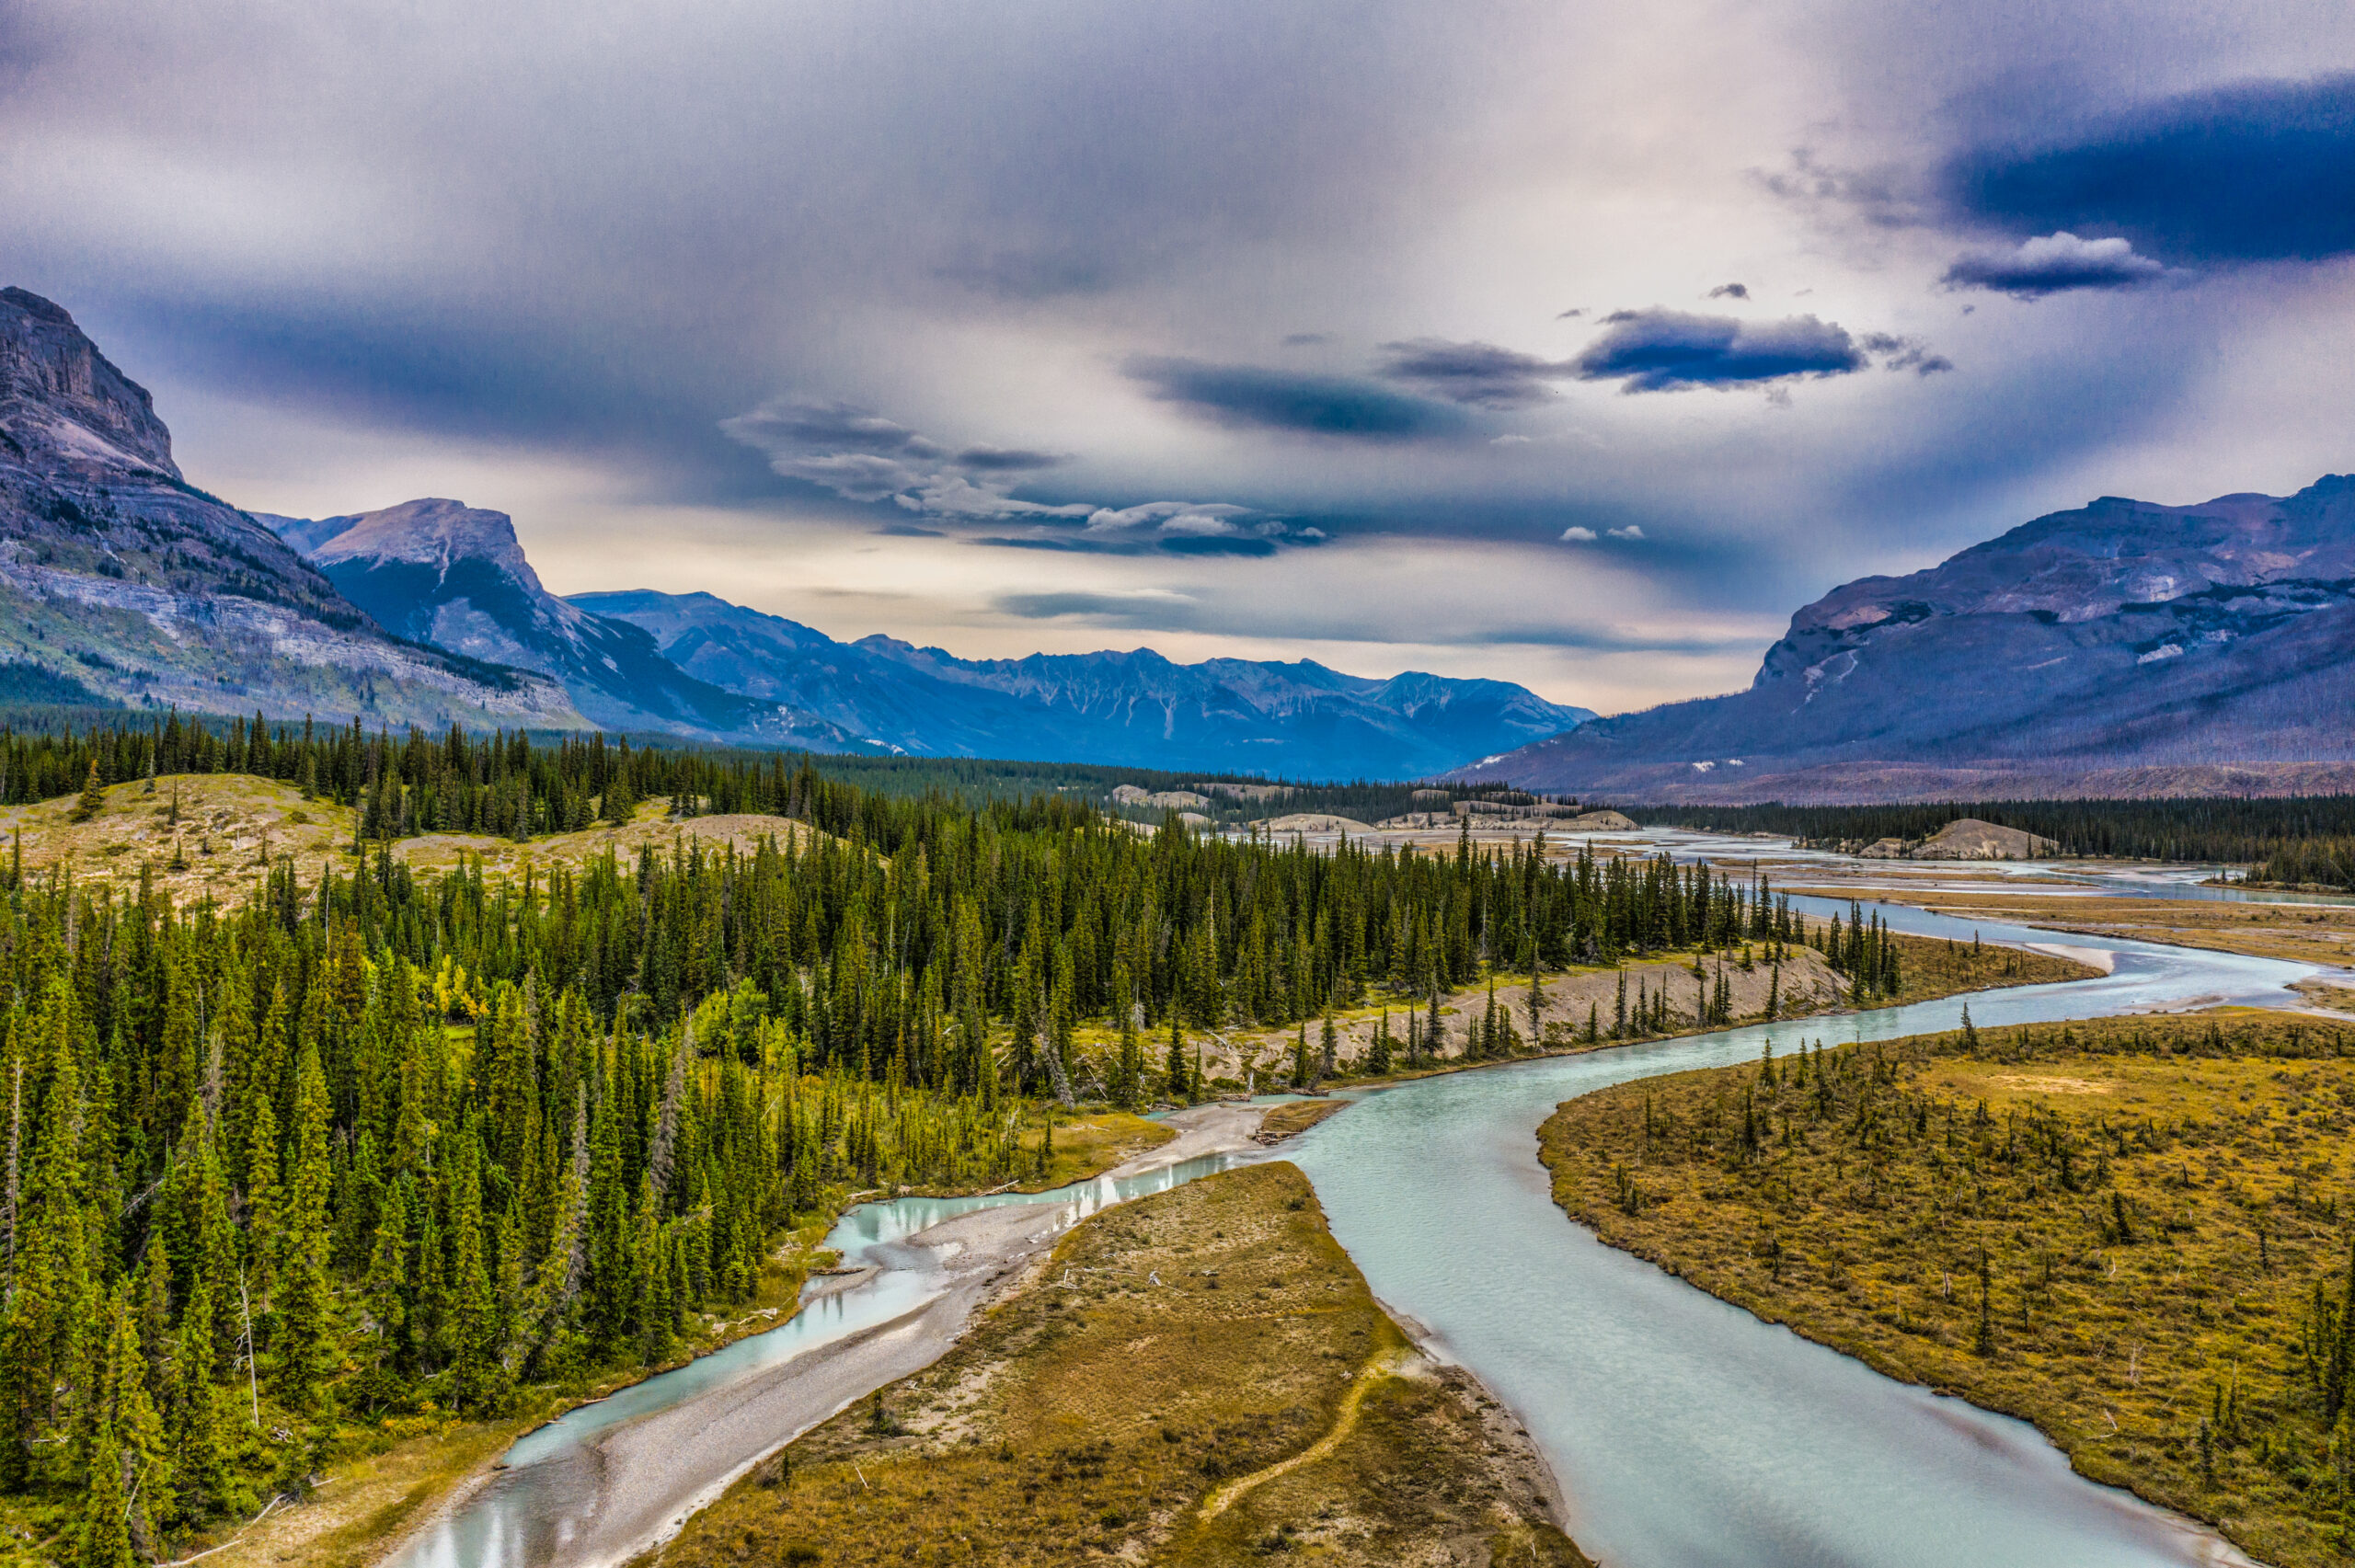 A shot from the Saskatchewan River Crossing located in the Rocky Mountains in Alberta Canada